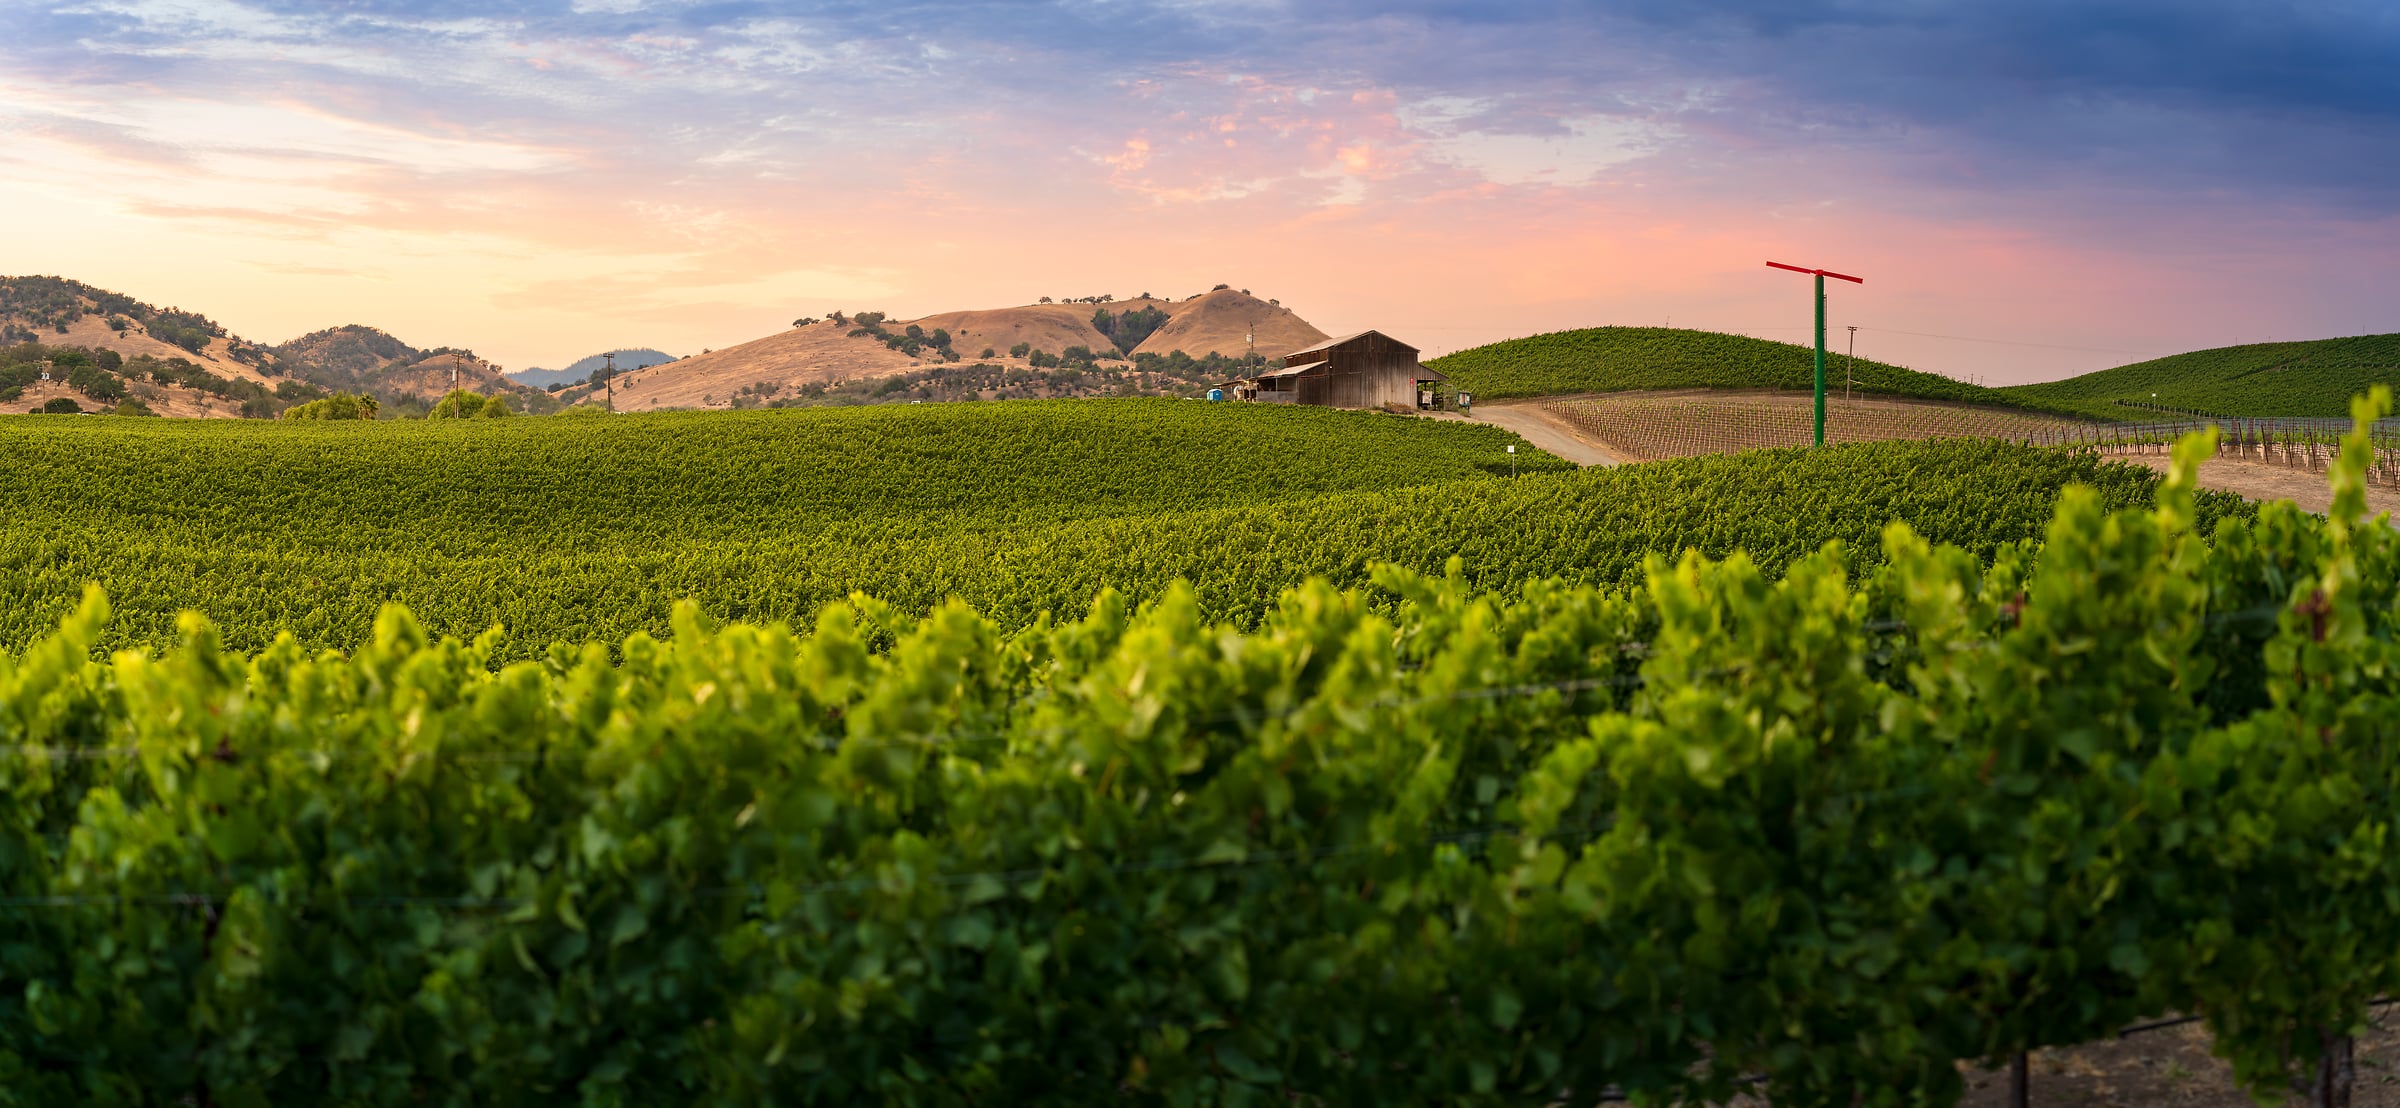 205 megapixels! A very high resolution, large-format VAST photo print of a vineyard in Napa at sunset; landscape photograph created by Jeff Lewis in Napa, California.